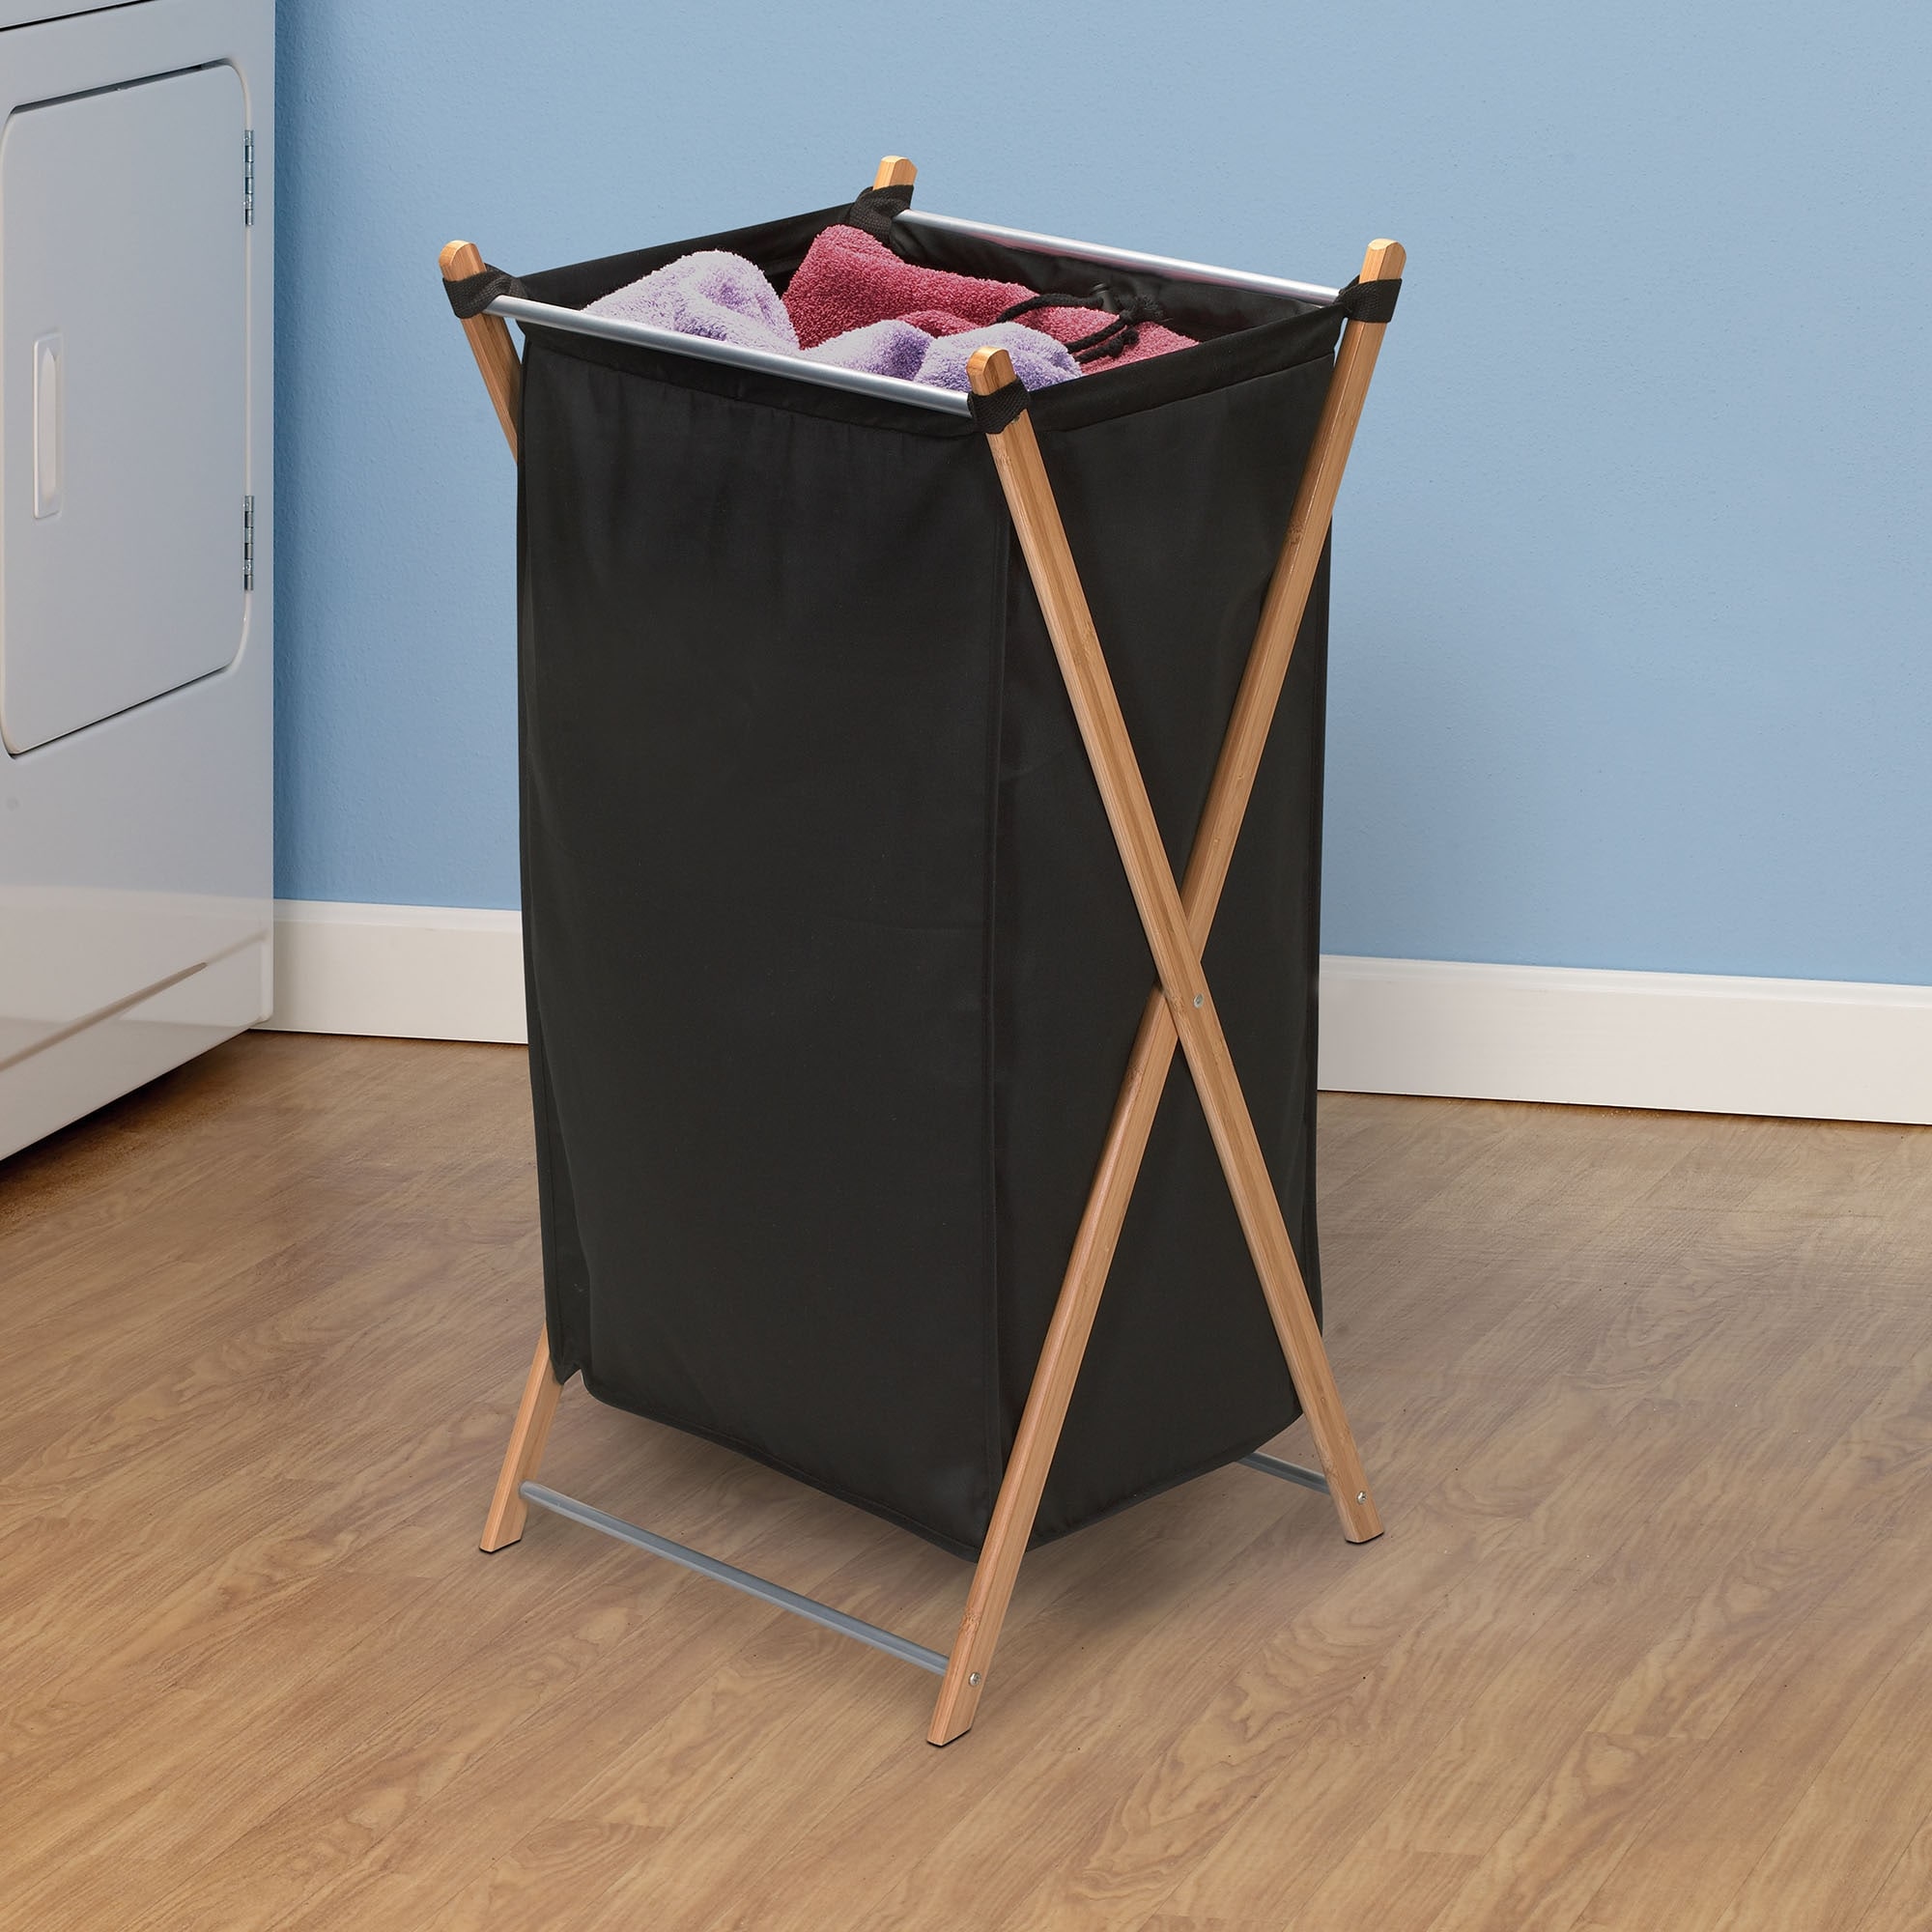 HOUSEHOLD ESSENTIALS X-Frame Wood Laundry Hamper Folding Wood Frame with  Washable Poly-Cotton Bag 6789-1 - The Home Depot